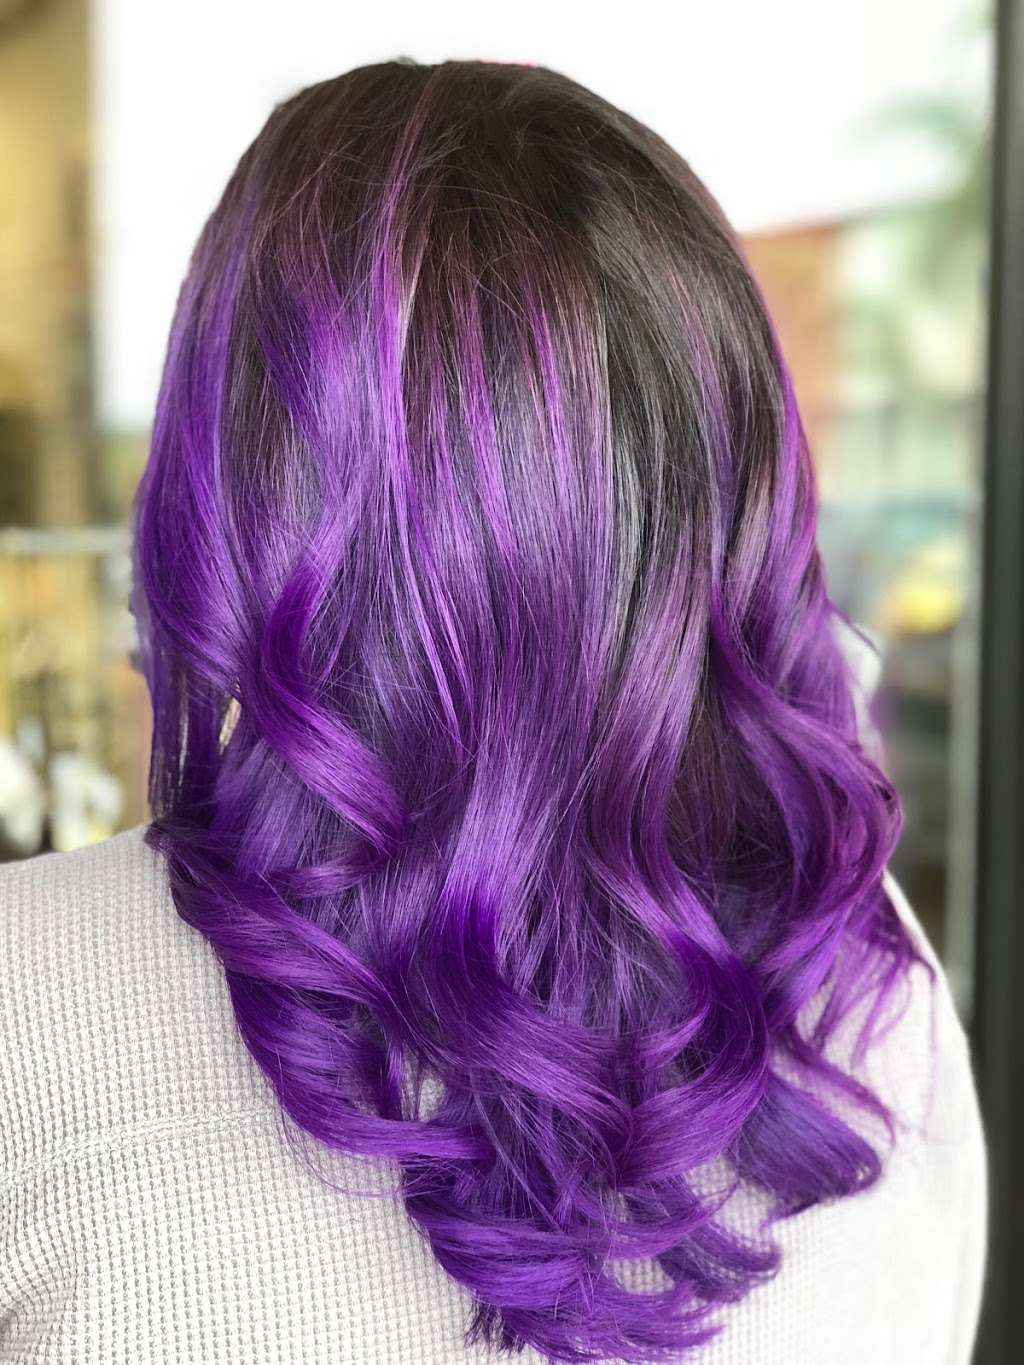 Hair By Jessica Woods | 6152, 4645 Frazee Rd suite c, Oceanside, CA 92057, USA | Phone: (760) 522-1585